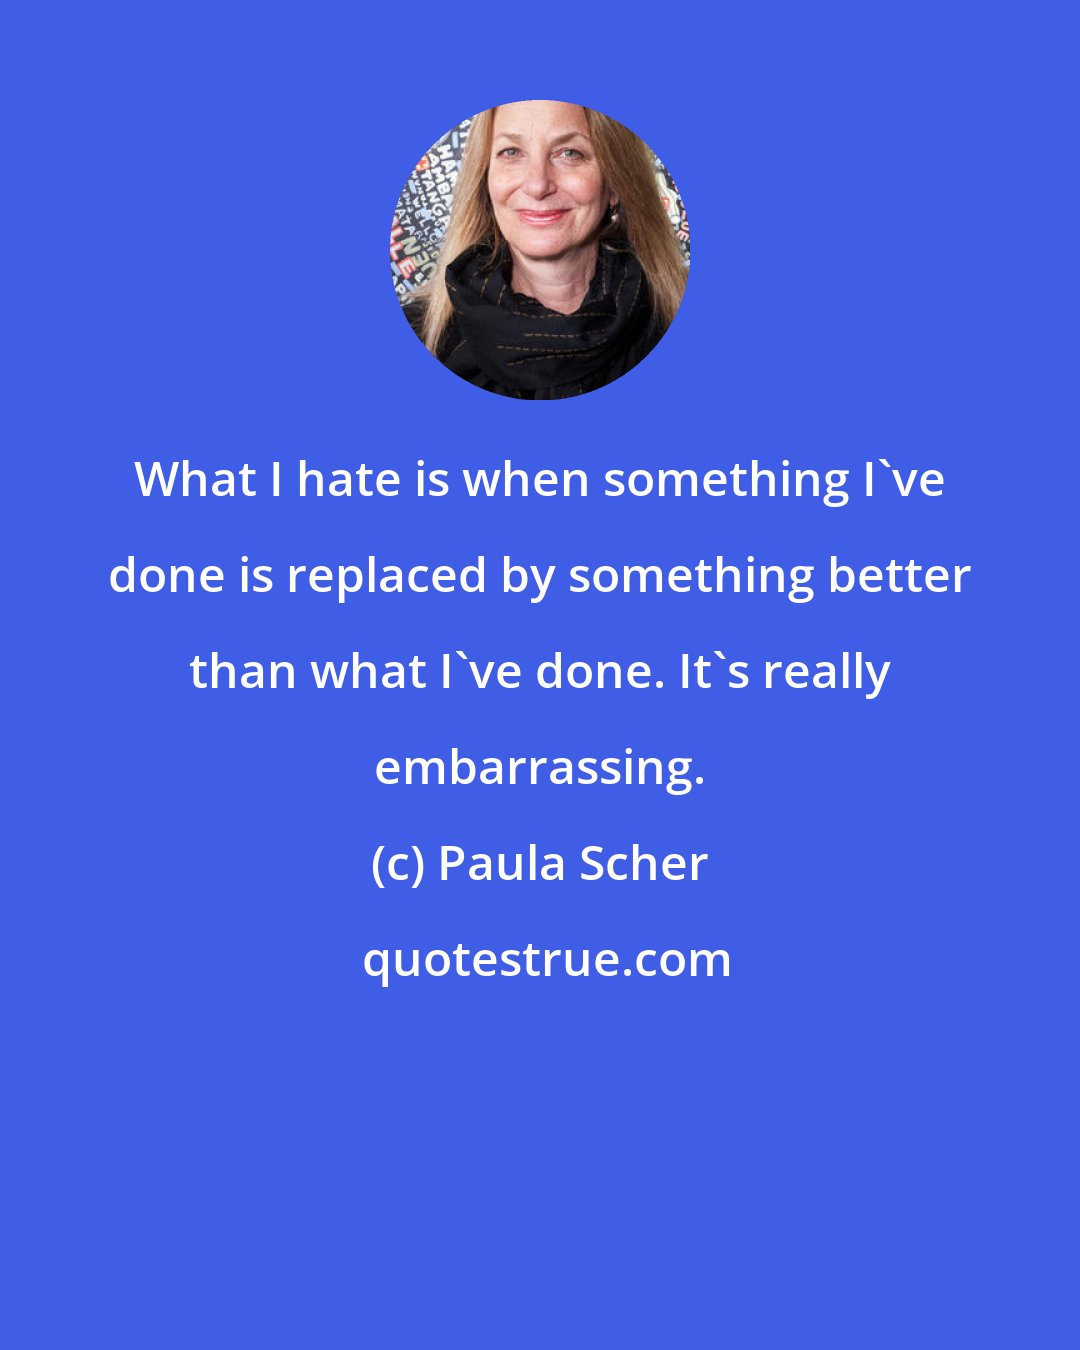 Paula Scher: What I hate is when something I've done is replaced by something better than what I've done. It's really embarrassing.